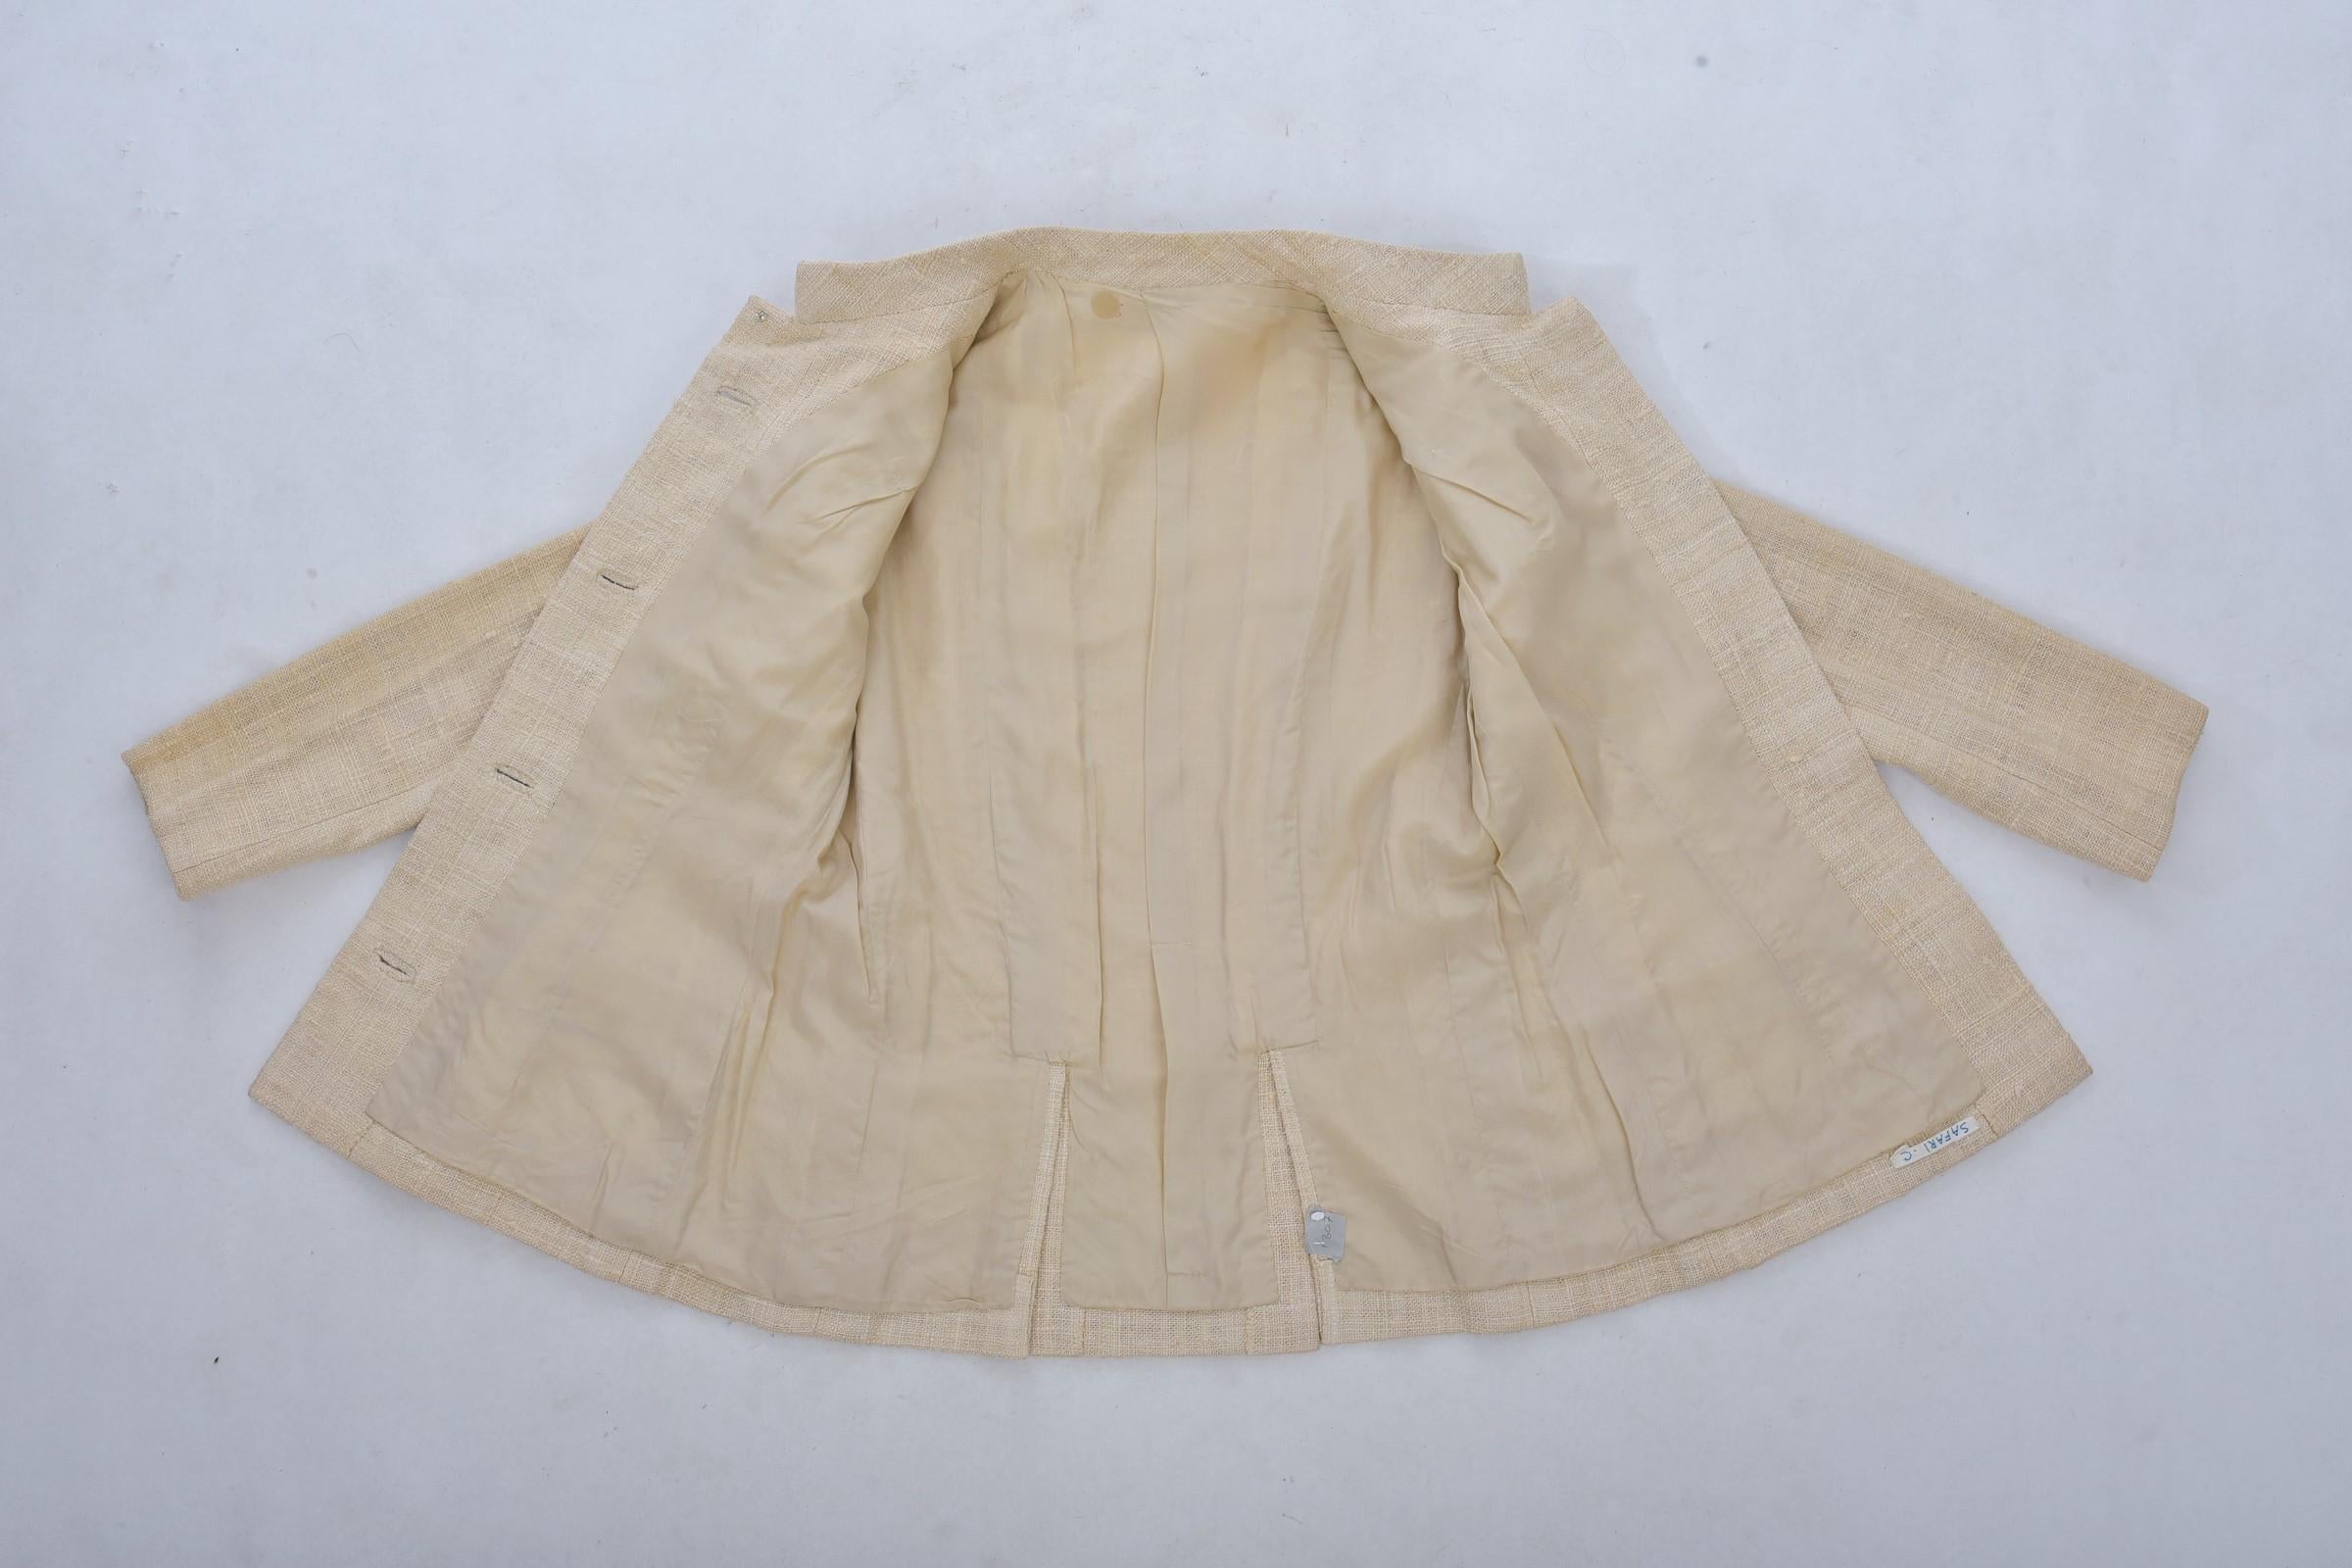  A French Safari Jacket In Beige Linen And Silk Toile Circa 1968-1972 For Sale 9